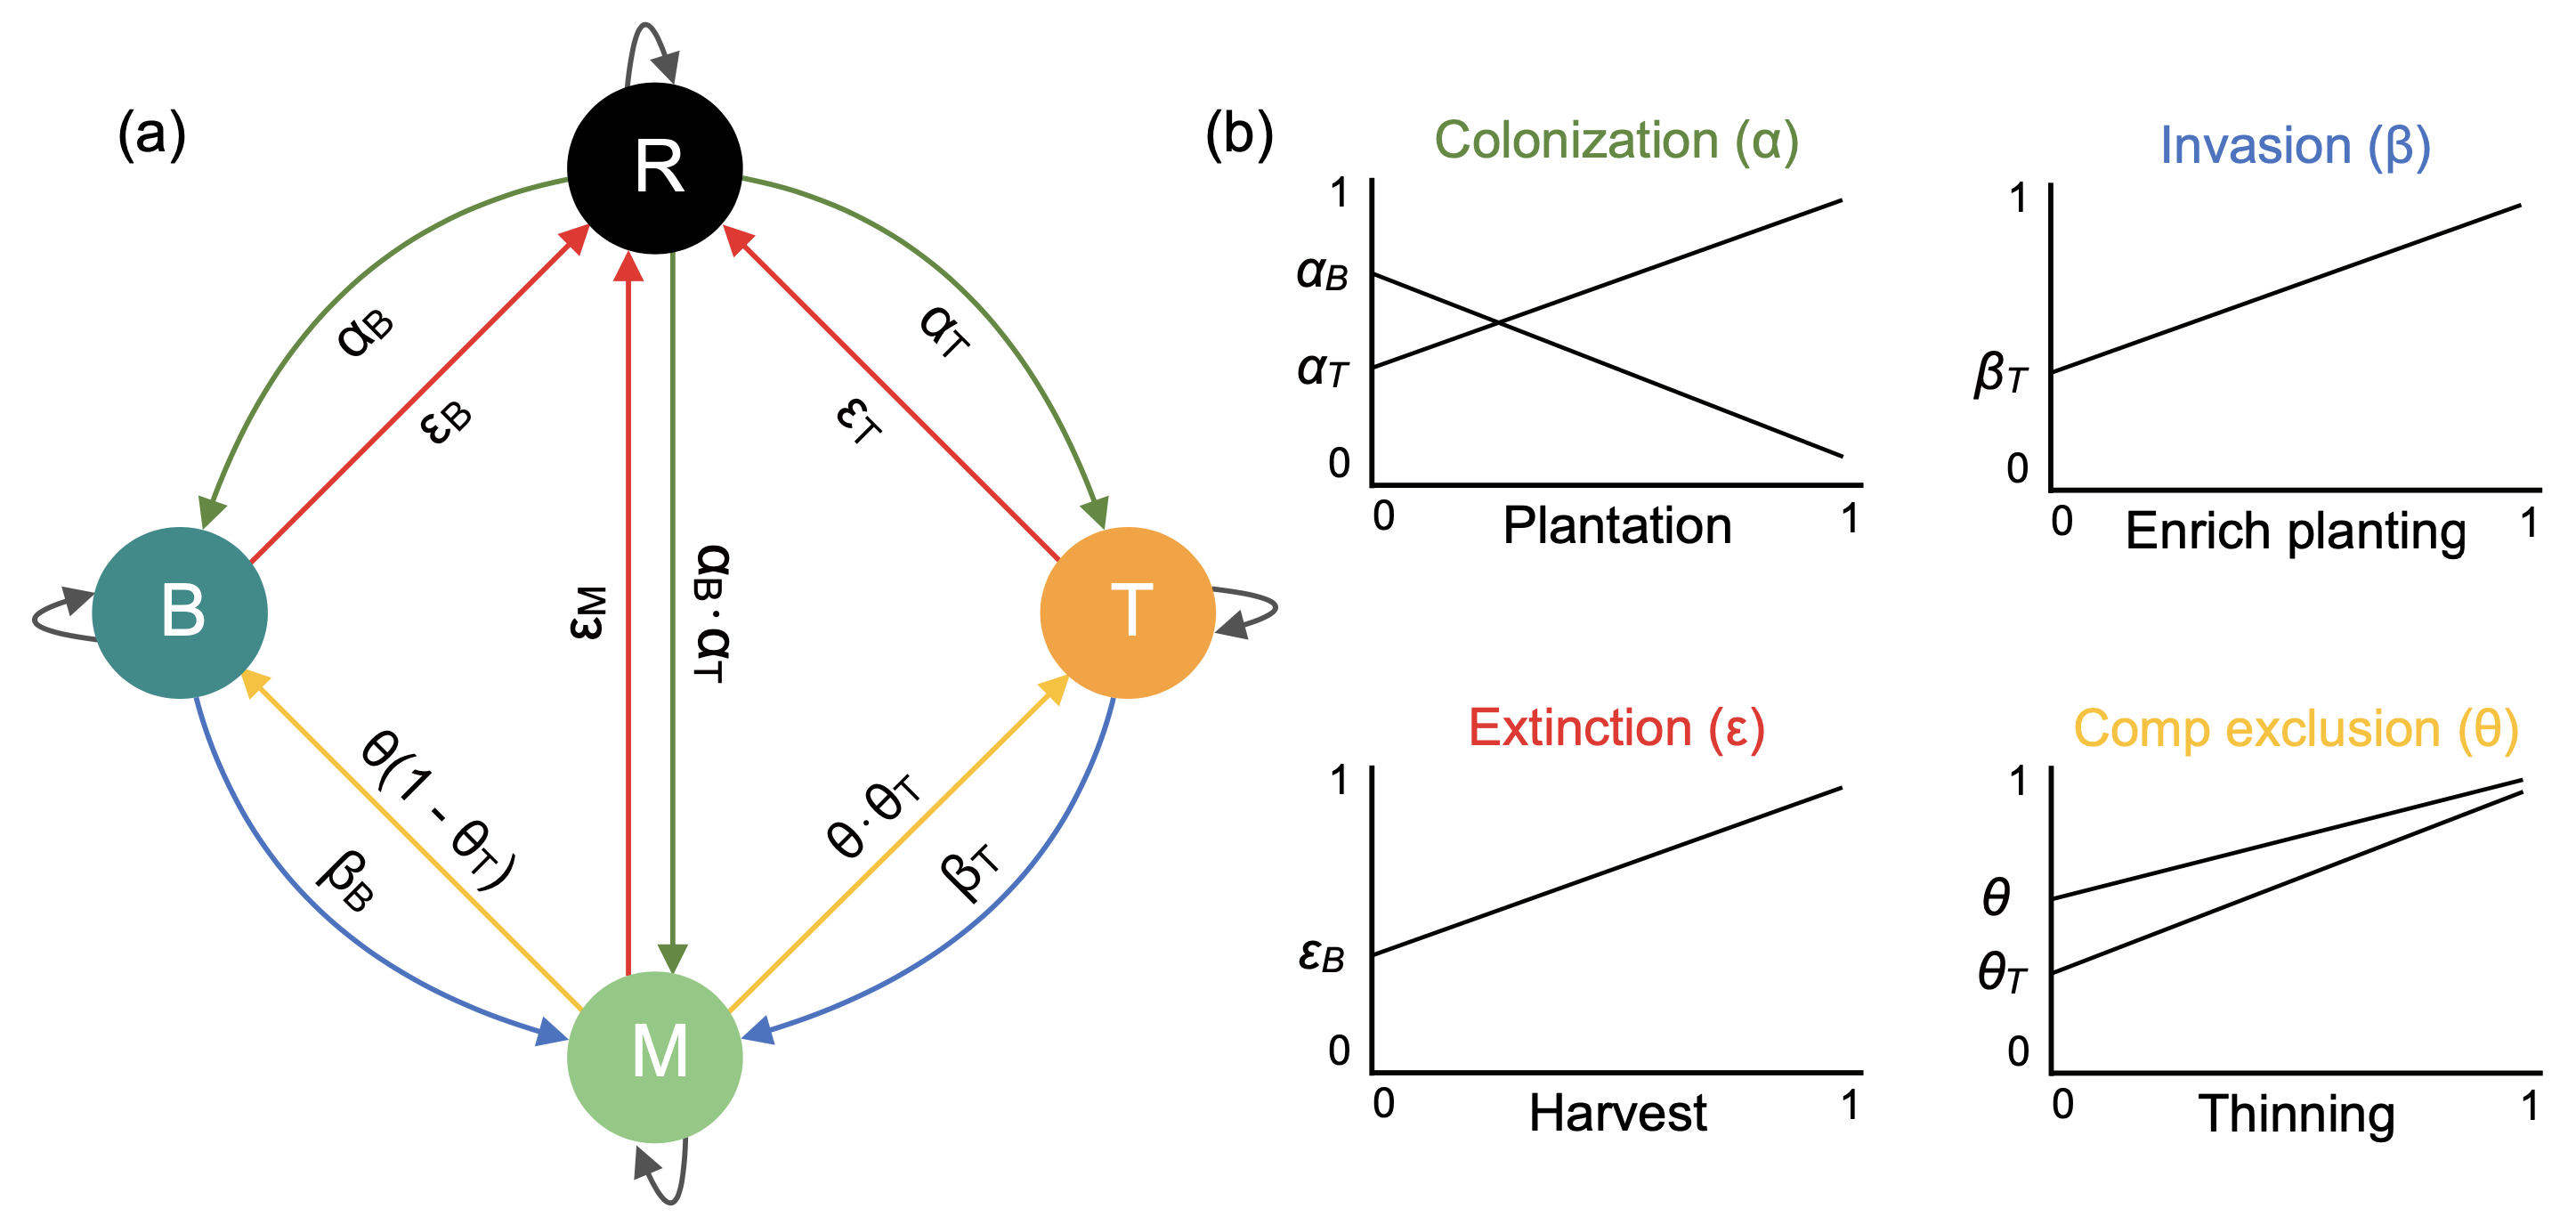 Figure 2: Schema of the State and Transition Model adapted from Vissault et al. (2020). Directional arrows describe the colonization (\alpha), extinction (\varepsilon), invasion (\beta), and competitive exclusion (\theta) processes driving the transition between the four forest states: (R)egeneration, (B)oreal, (T)emperate, and (M)ixedwood. The panel (b) summarises the effect of increasing the intensity of forest management in each of the four ecological processes. For instance, increasing plantation intensity will increase the rate of transition from R to T and consequently descrease the rate of change from R to B and from R to M. The values of each of the 9 specific (process x state) parameters are shown in Figure S7.